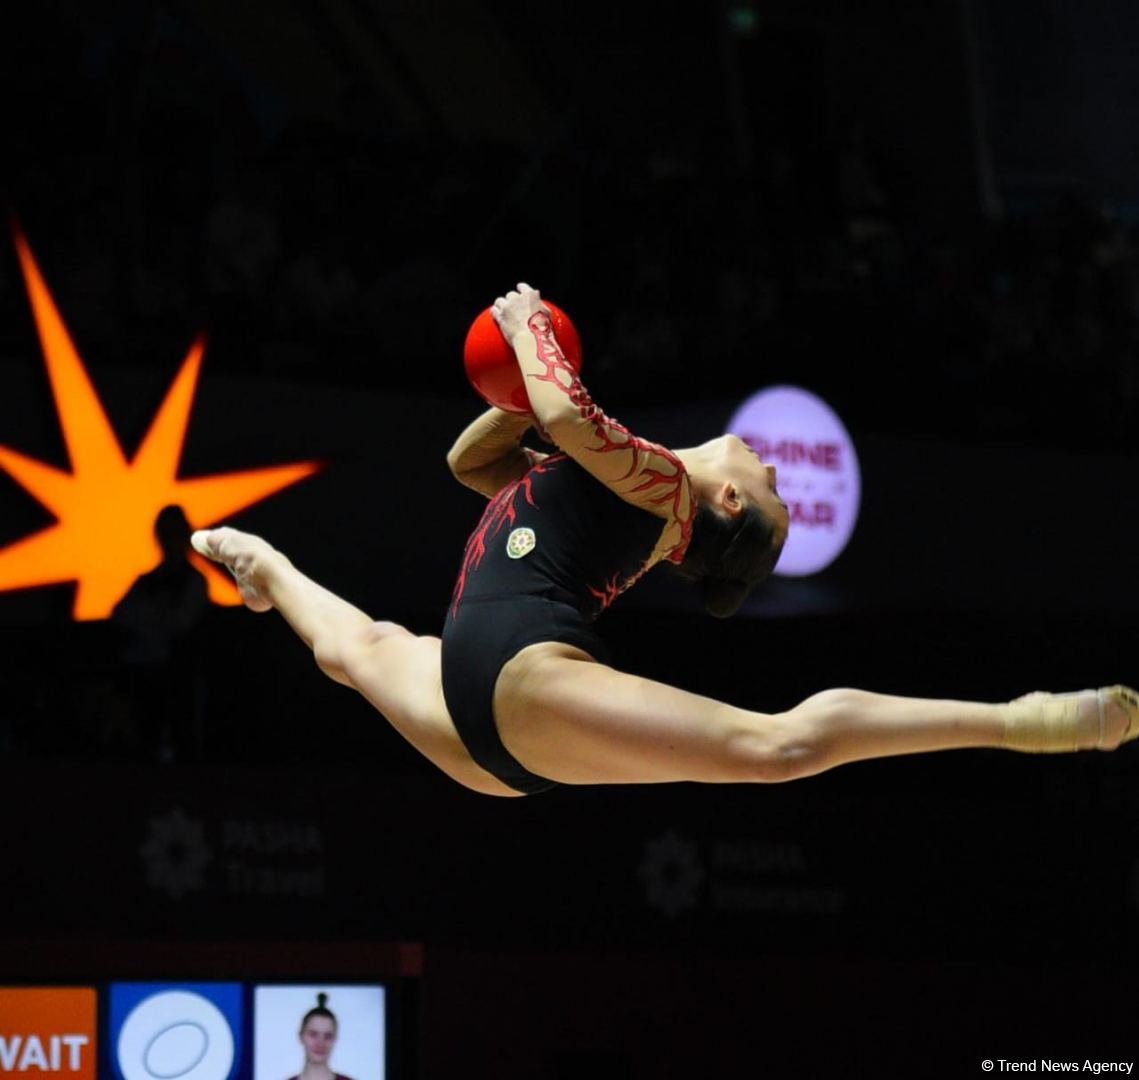 Exciting programs of gymnasts, audience delight - highlights of second day 39th European Rhythmic Gymnastics Championship in Baku (PHOTO)